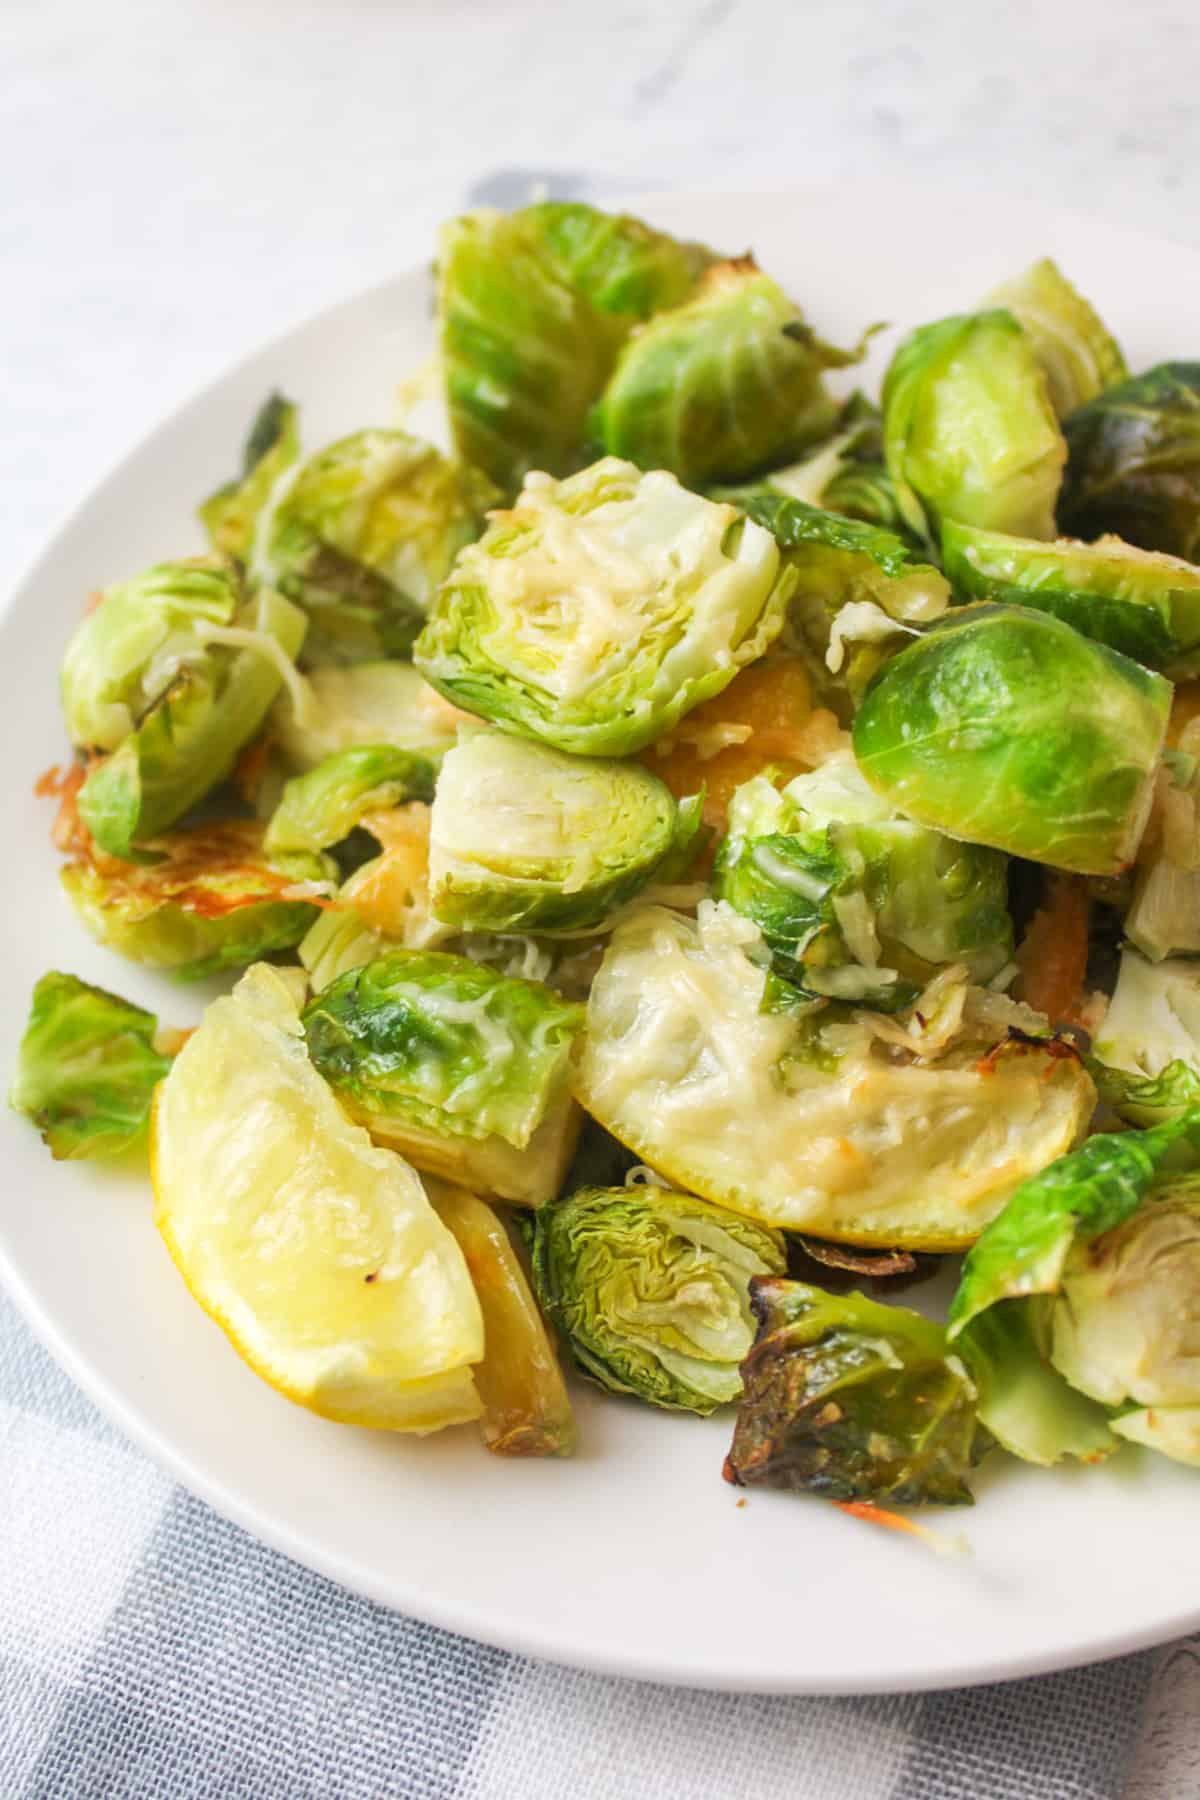 roasted garlic brussel sprouts with parmesan cheese and lemon wedge on a white plate